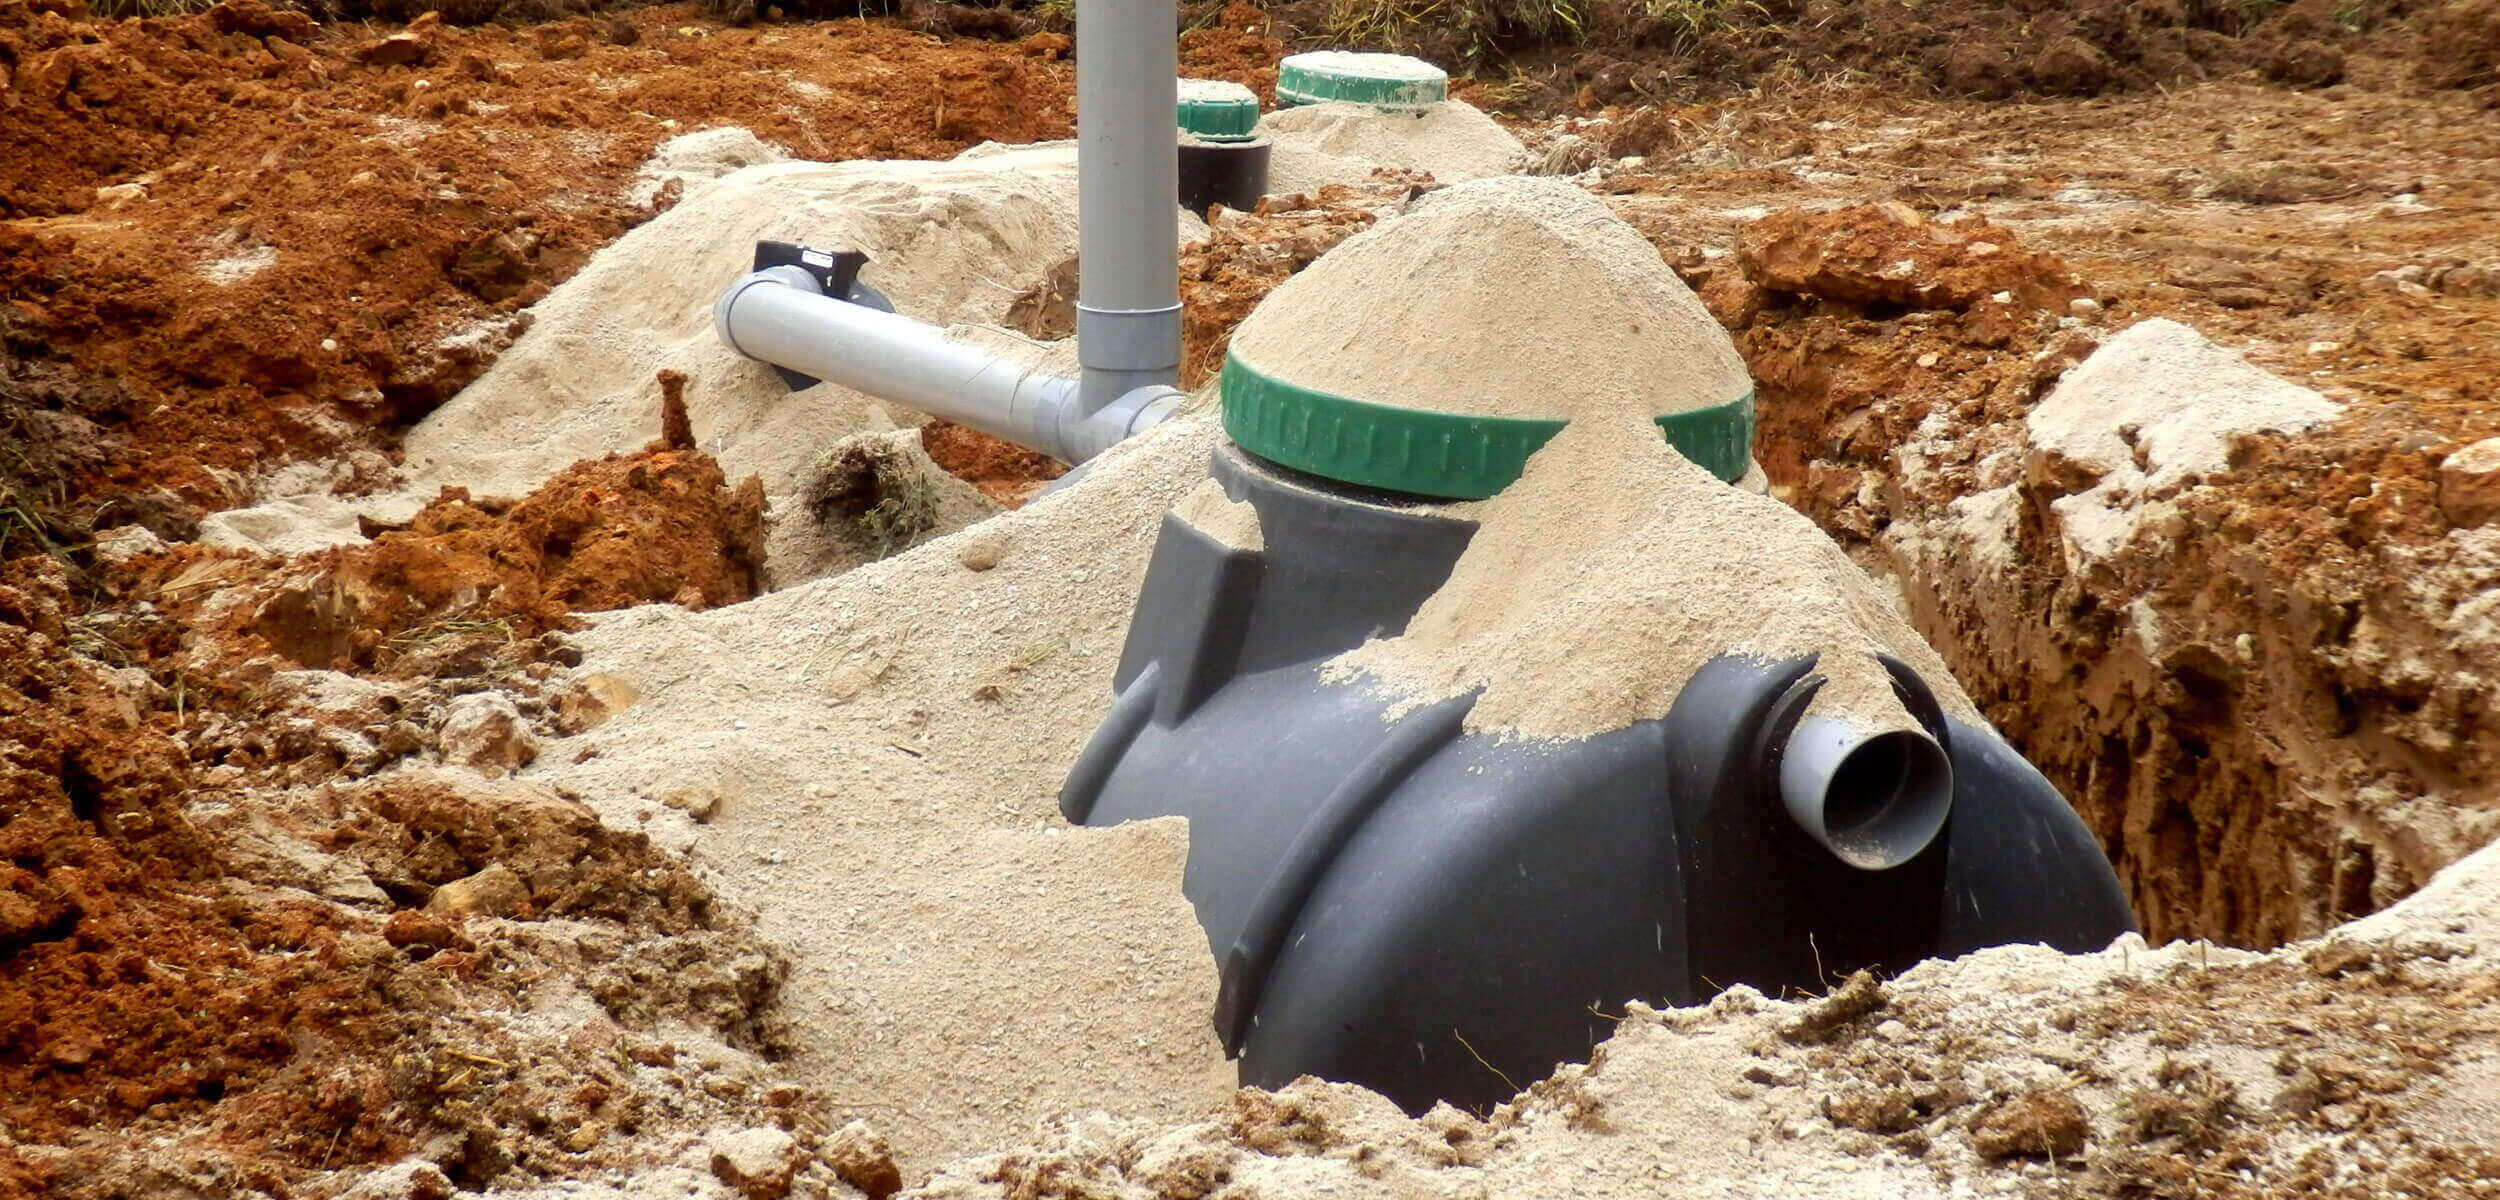 A septic tank being installed